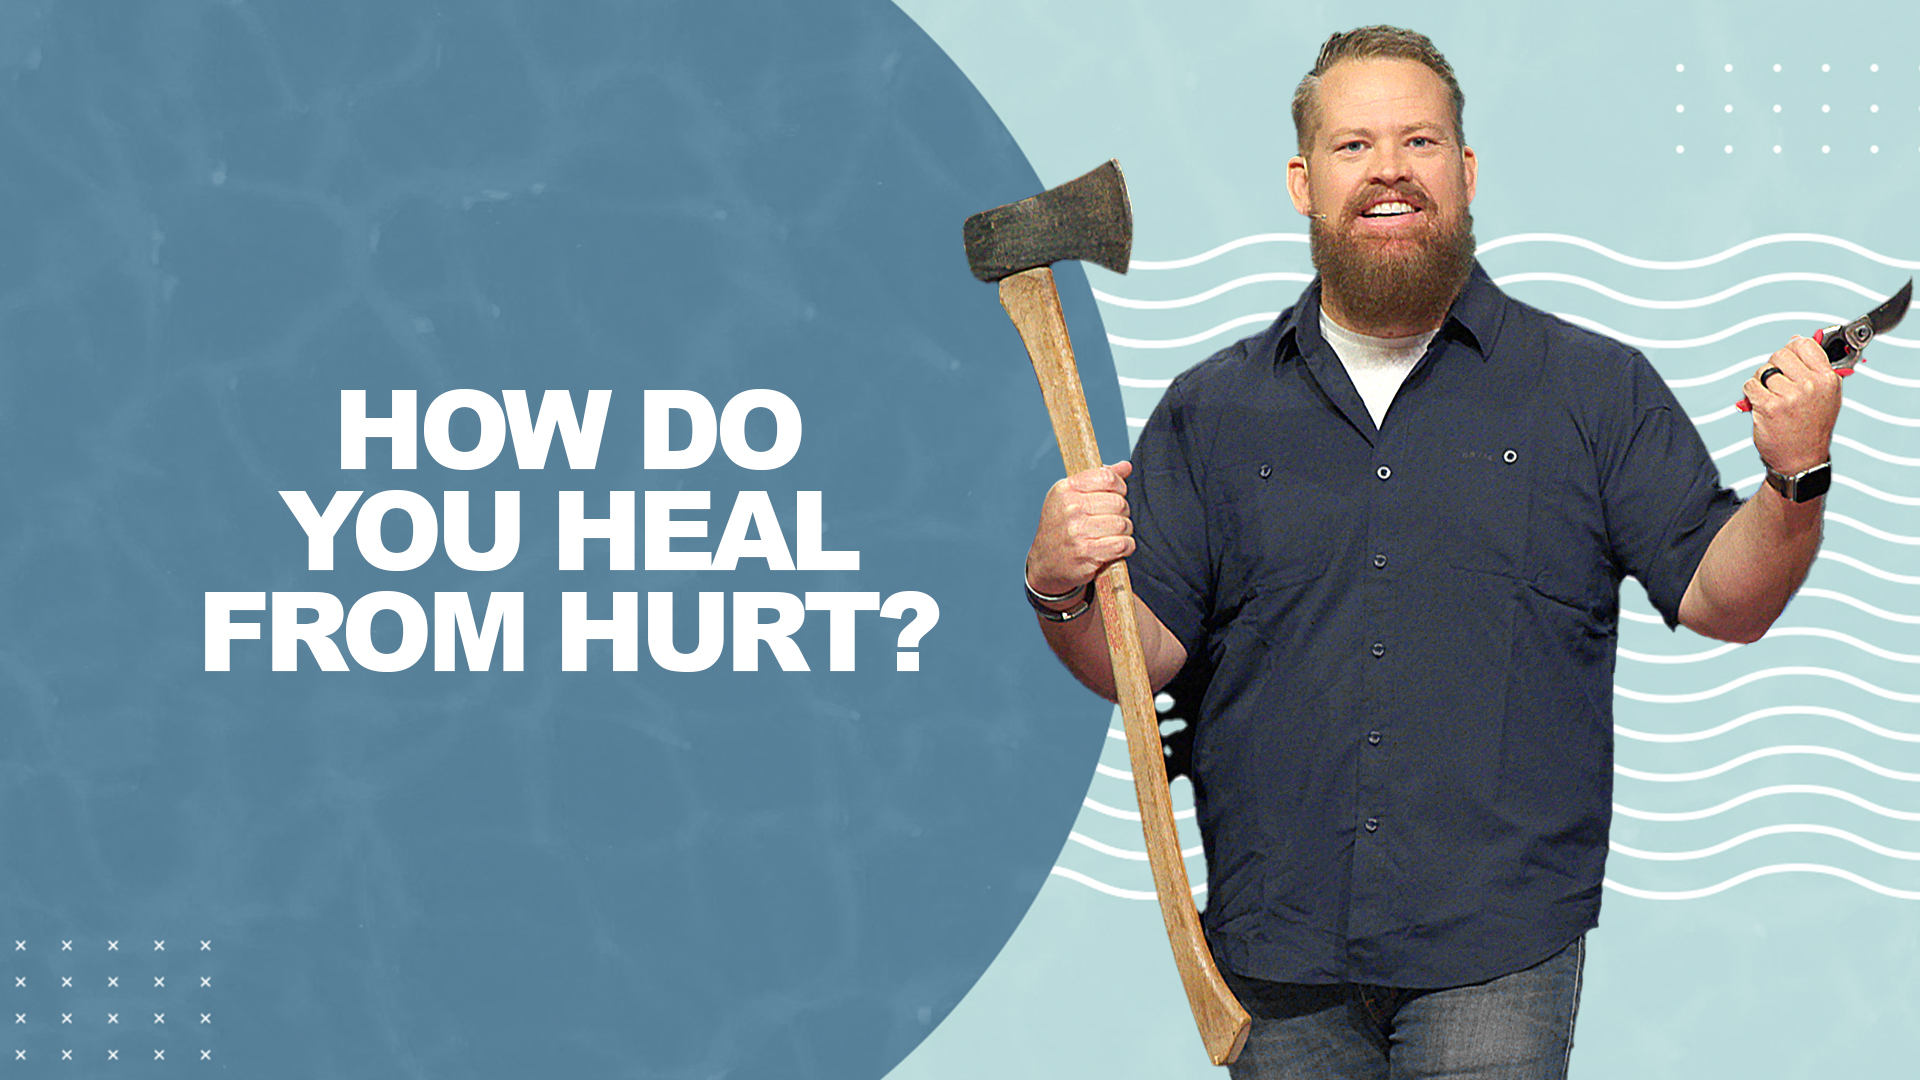 How Do You Heal From Hurt?